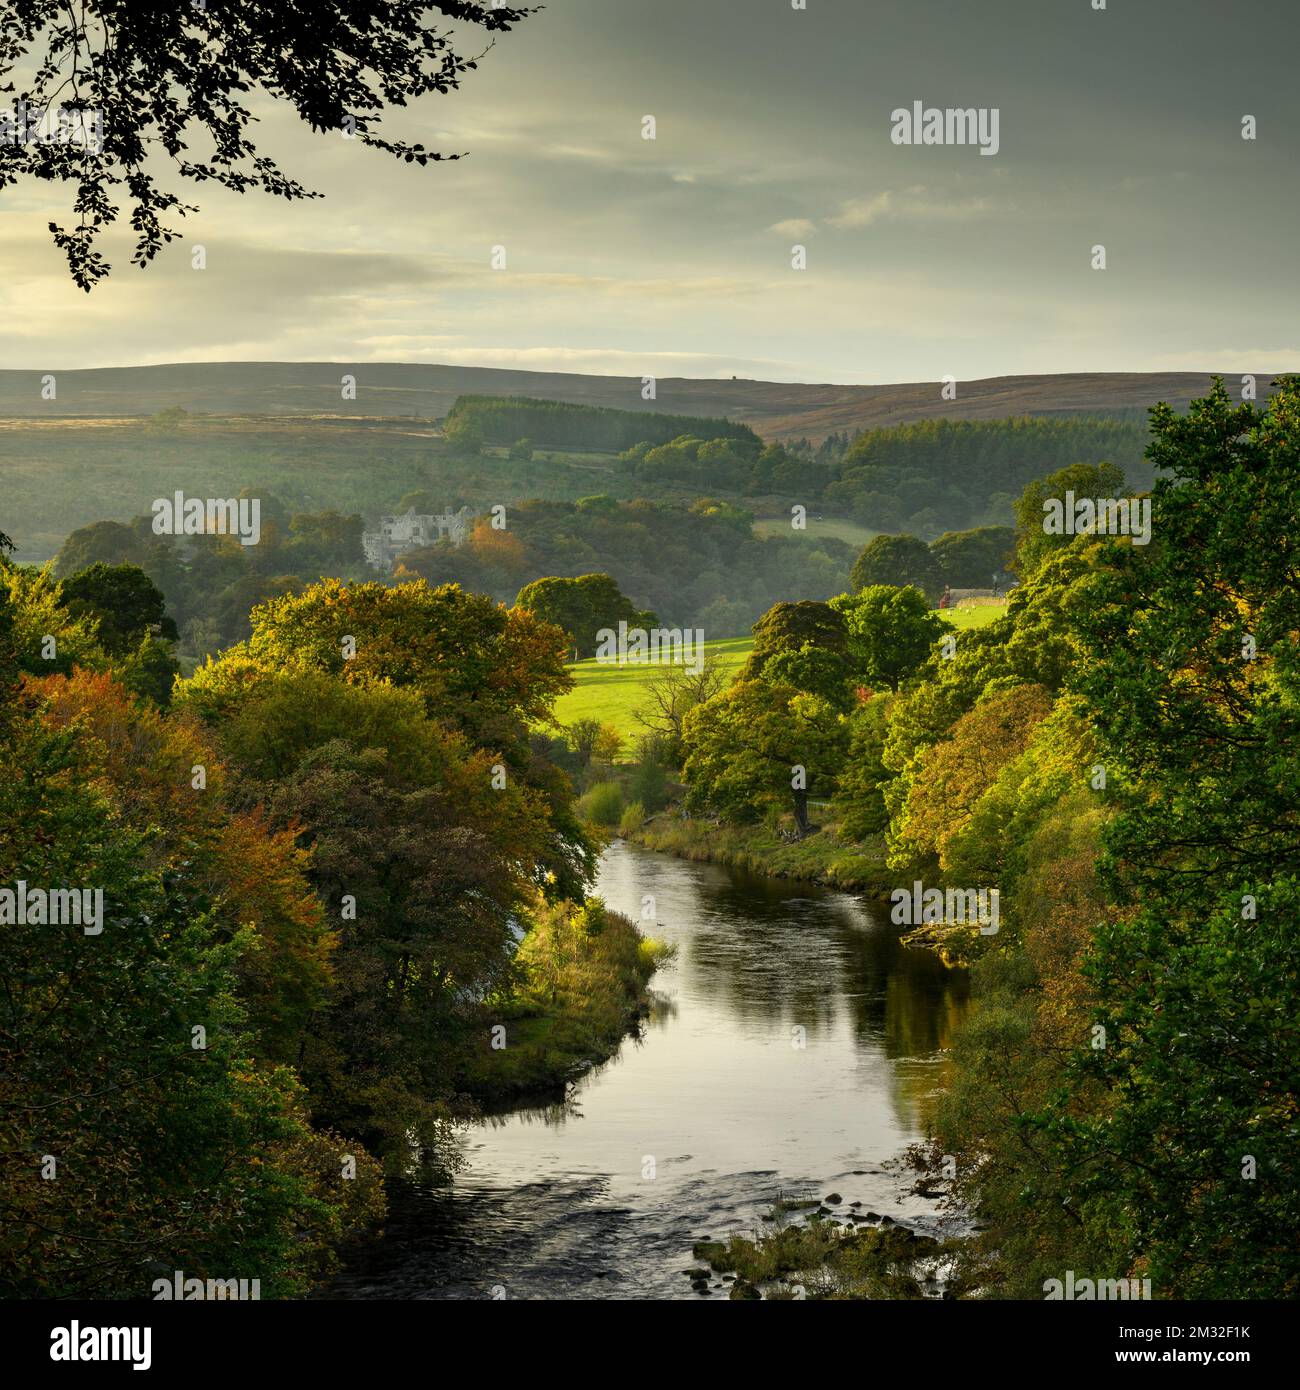 Autumn long-distance view upstream of River Wharfe, old historic Barden Tower ruins & evening sky - Bolton Abbey Estate, Yorkshire Dales, England, UK. Stock Photo